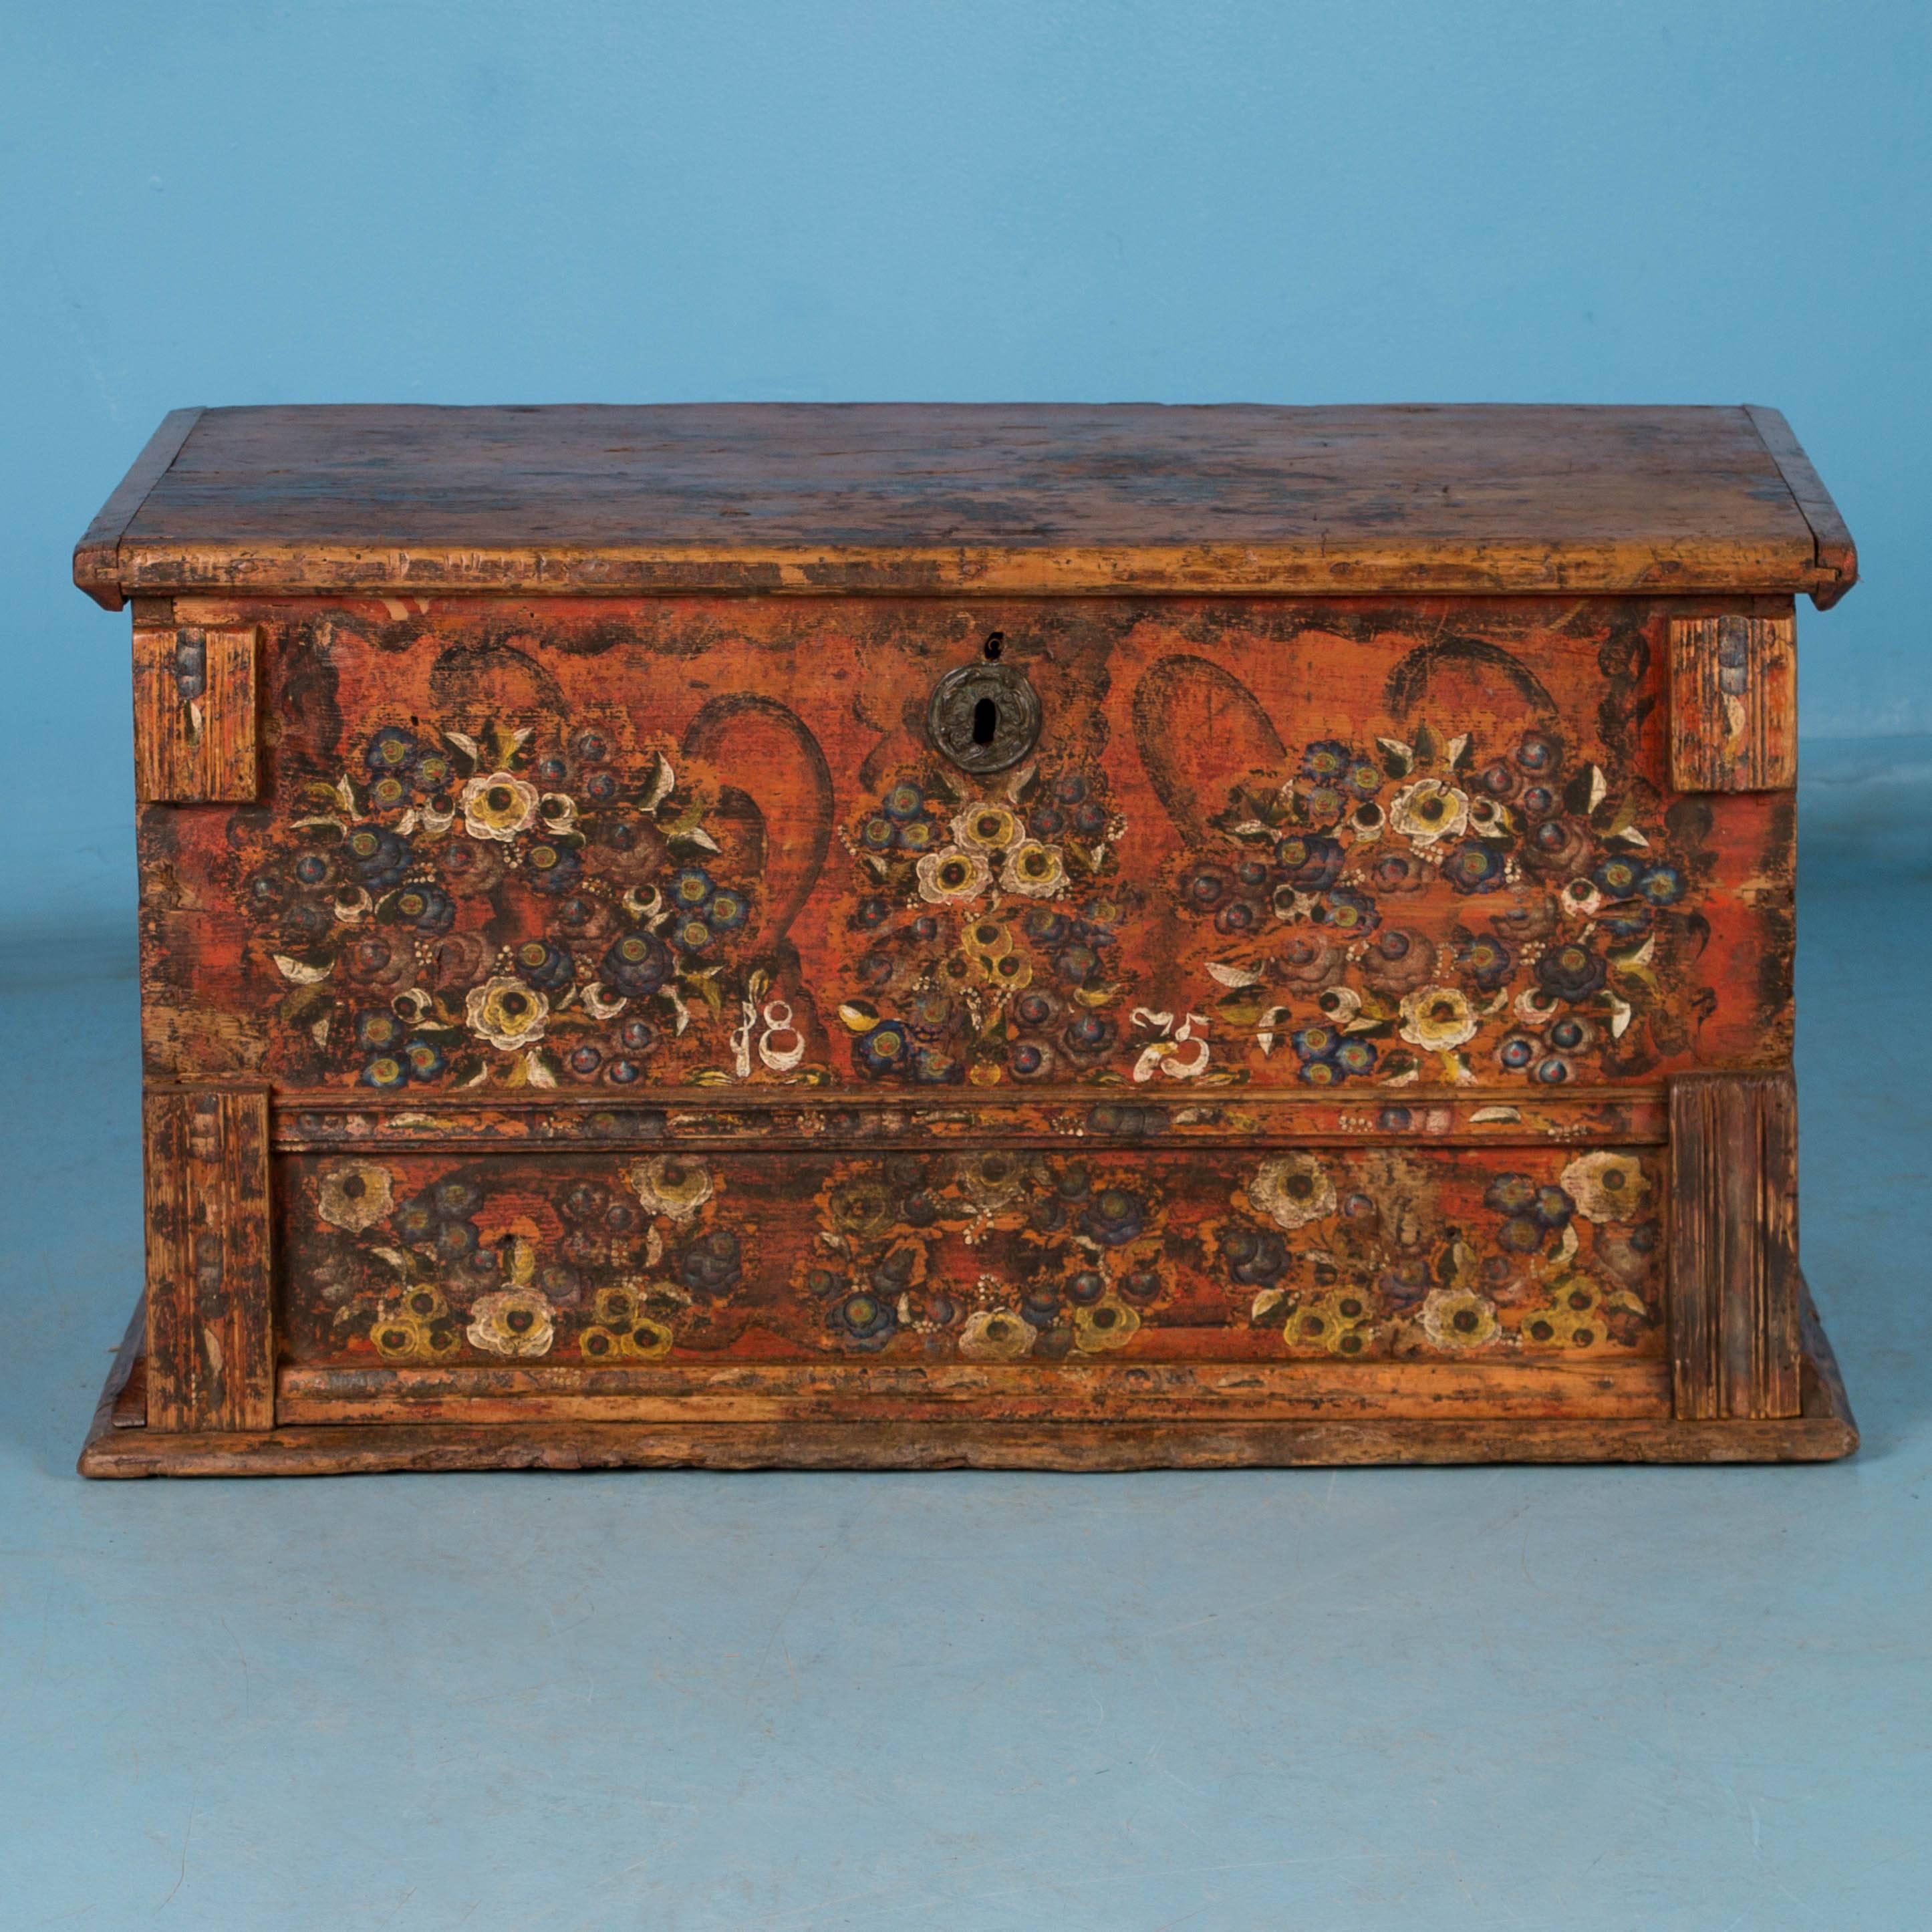 On the front of this trunk, the original painted floral bouquets over a burnt orange background is a great example of Romanian folk art. The flat top allows it to serve many functions in a modern home, including small coffee table, side table,